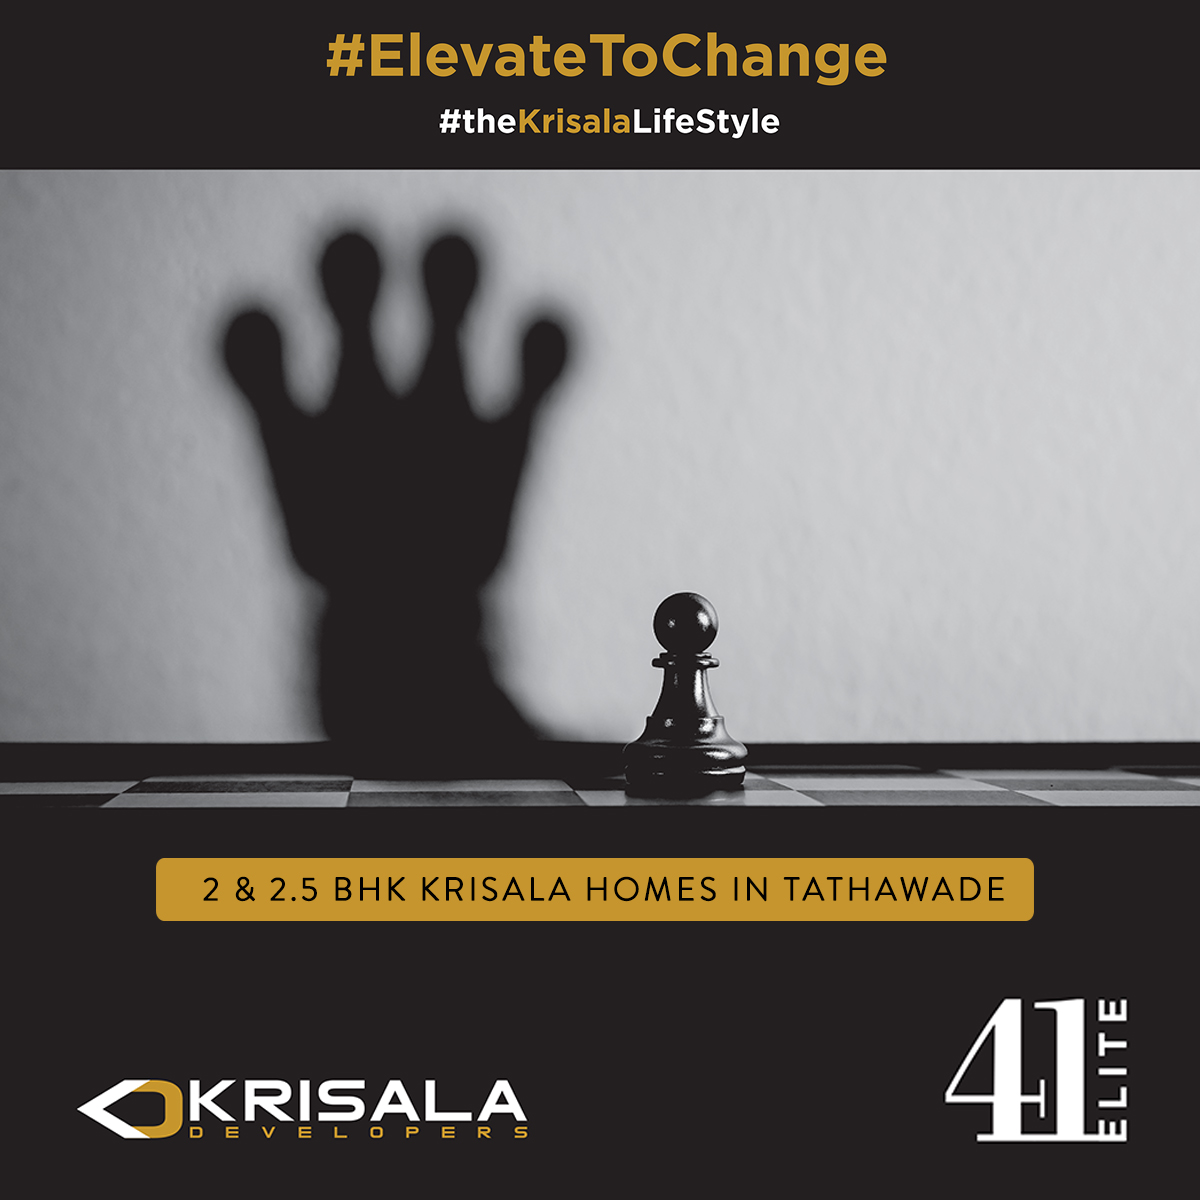 #theKrisalaLifestyle comes back to Tathawade!

The award-winning 41 Elite gives you another chance to #ElevateToKrisala!

For more details, visit: krisala.com/41elite/